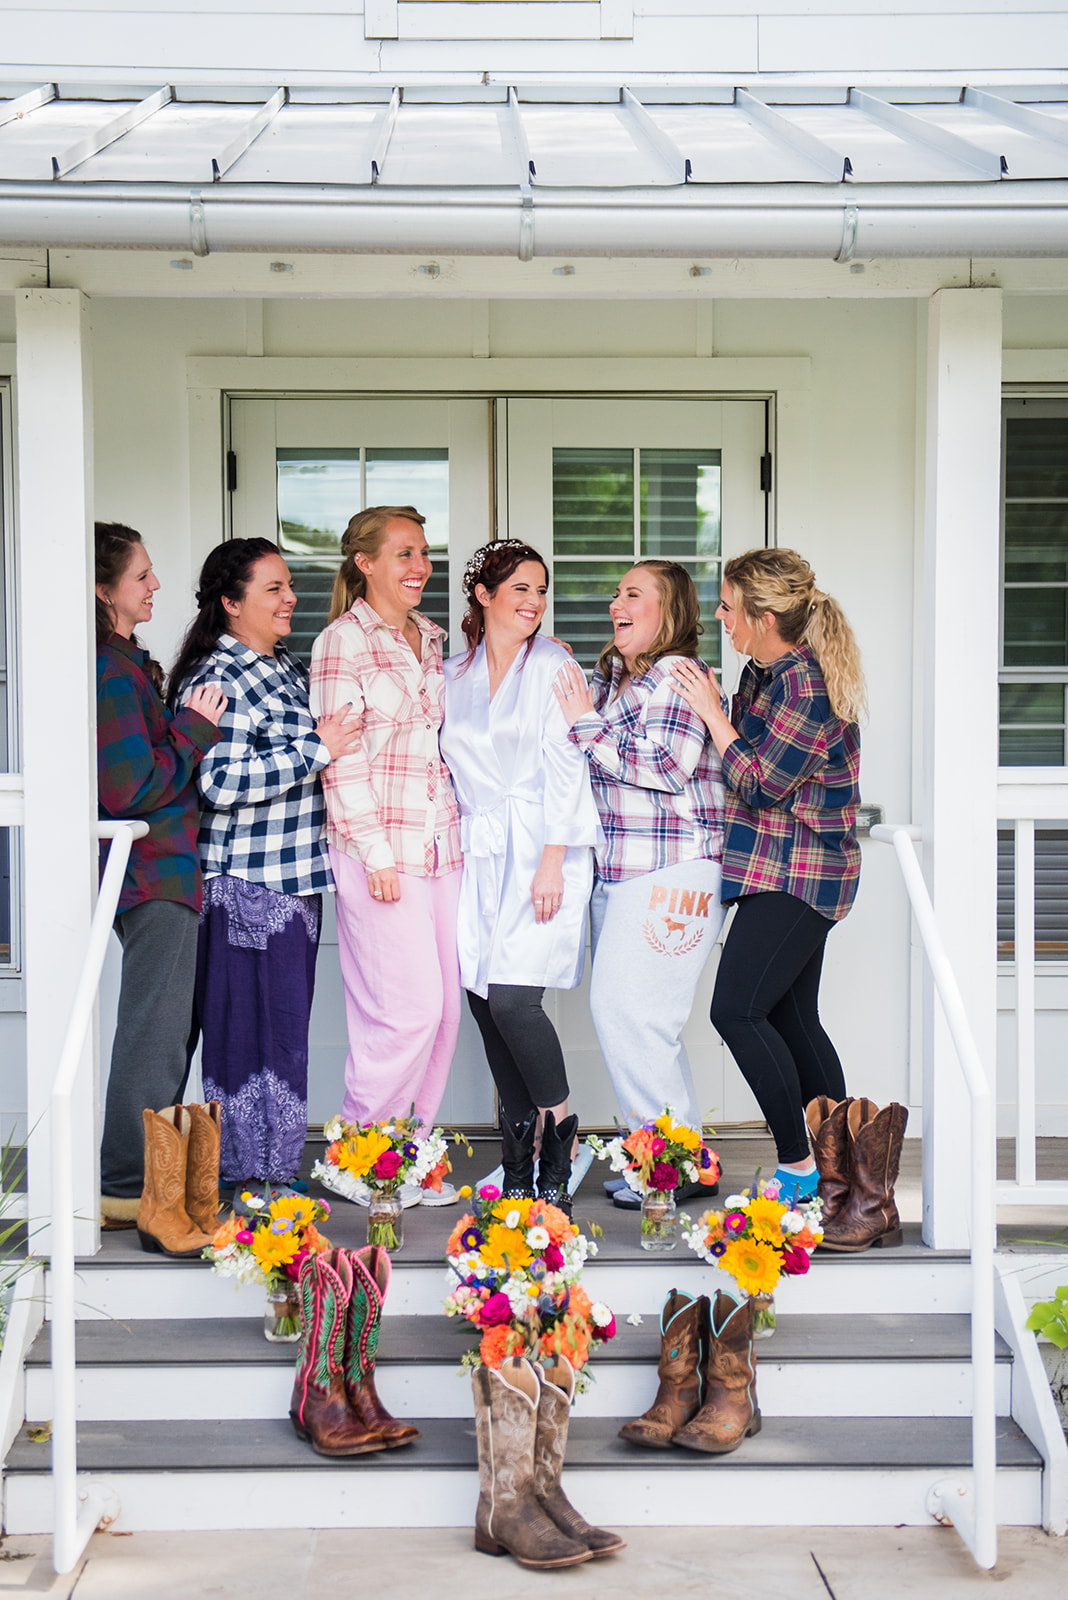 Bride and bridesmaids stand on front porch smiling at each other. Bridesmaids are wearing different color flannel shirts